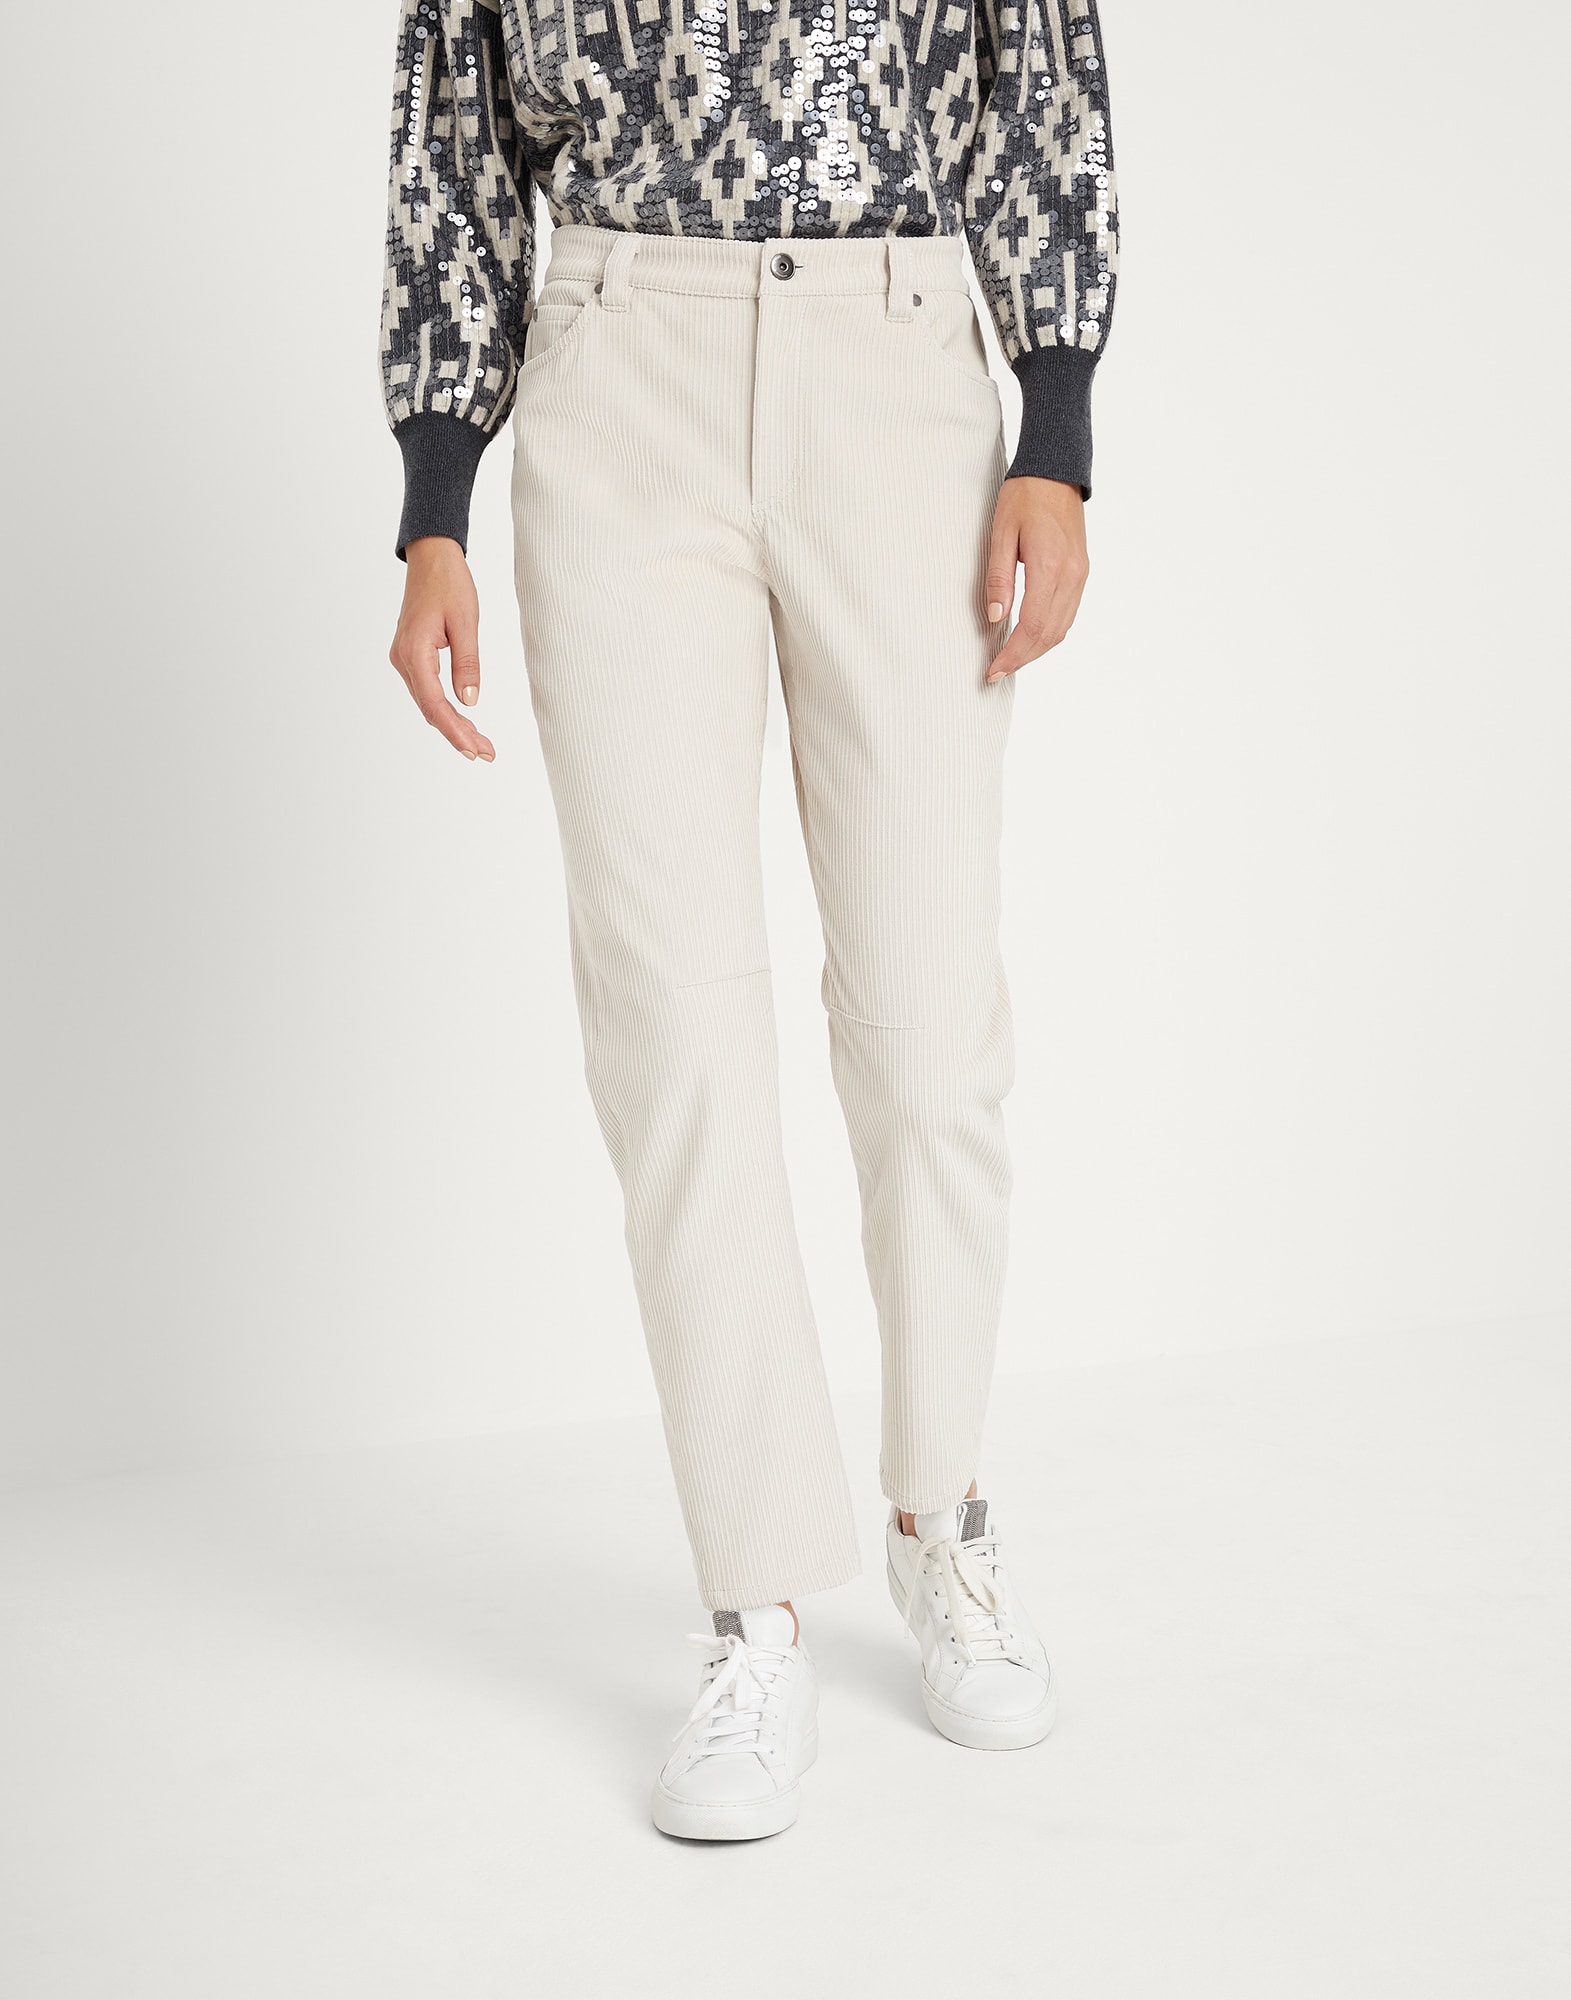 WHITE LINEN PANT (RELAXED TAPERED FIT) – ROOKIES